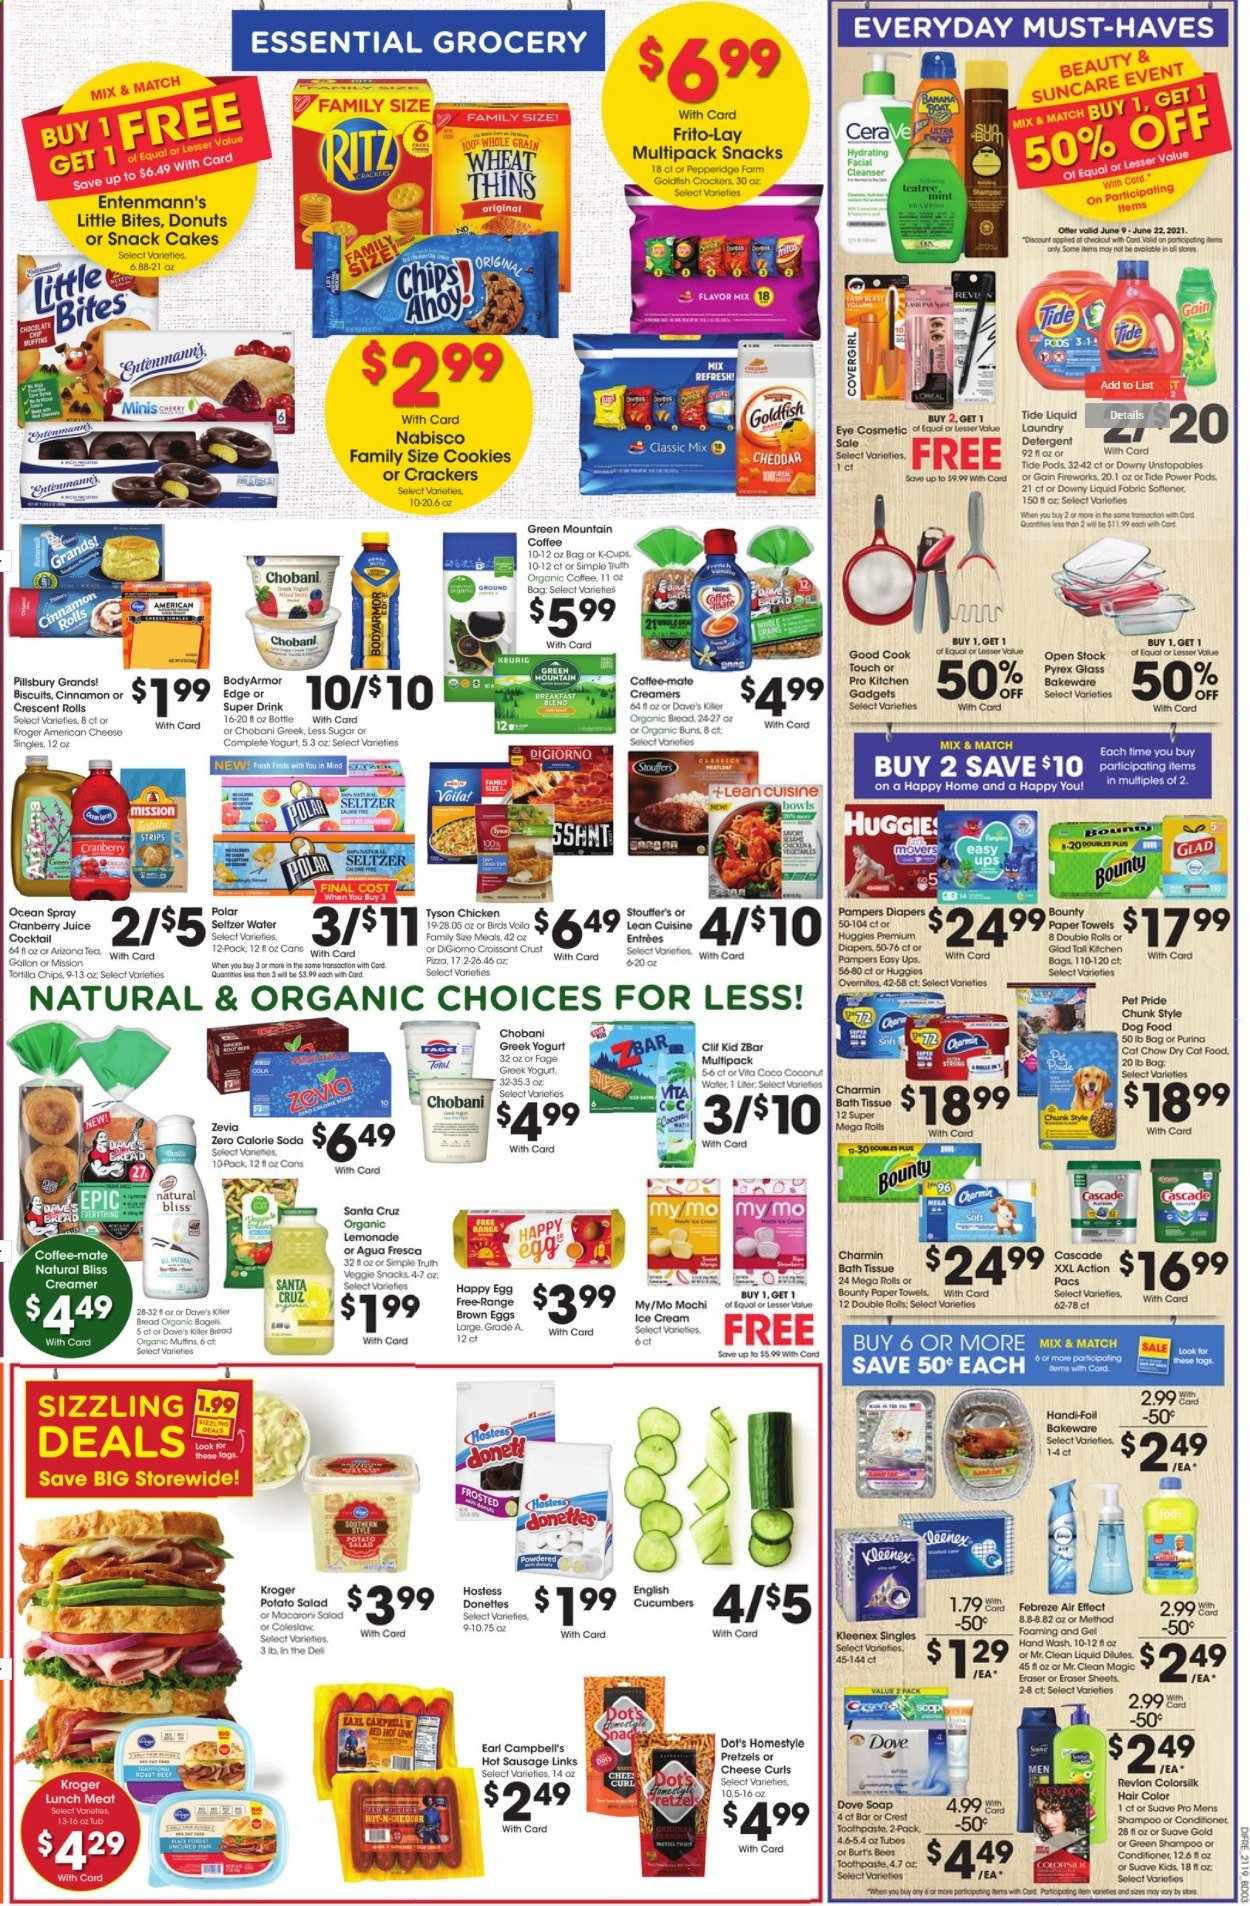 thumbnail - Baker's Flyer - 06/09/2021 - 06/15/2021 - Sales products - bread, pretzels, cake, buns, cinnamon roll, crescent rolls, donut, muffin, Entenmann's, cucumber, Campbell's, coleslaw, pizza, Pillsbury, Lean Cuisine, sausage, potato salad, macaroni salad, lunch meat, american cheese, greek yoghurt, yoghurt, Chobani, Coffee-Mate, eggs, creamer, ice cream, strips, Stouffer's, cookies, Bounty, crackers, biscuit, Little Bites, tortilla chips, chips, Thins, Goldfish, Frito-Lay, cranberry juice, lemonade, soda, juice, coconut water, AriZona, seltzer water, tea, organic coffee, coffee capsules, K-Cups, Keurig, breakfast blend, Green Mountain, Huggies, Pampers, nappies, Dove, bath tissue, Kleenex, kitchen towels, paper towels, Charmin, detergent, Febreze, Gain, Cascade, Tide, Unstopables, fabric softener, laundry detergent, Gain Fireworks, Downy Laundry, shampoo, Suave, hand wash, soap, toothpaste, Crest, CeraVe, cleanser, conditioner, Revlon, hair color, bakeware, Pyrex, eraser, animal food, cat food, dog food, Purina, dry cat food. Page 6.